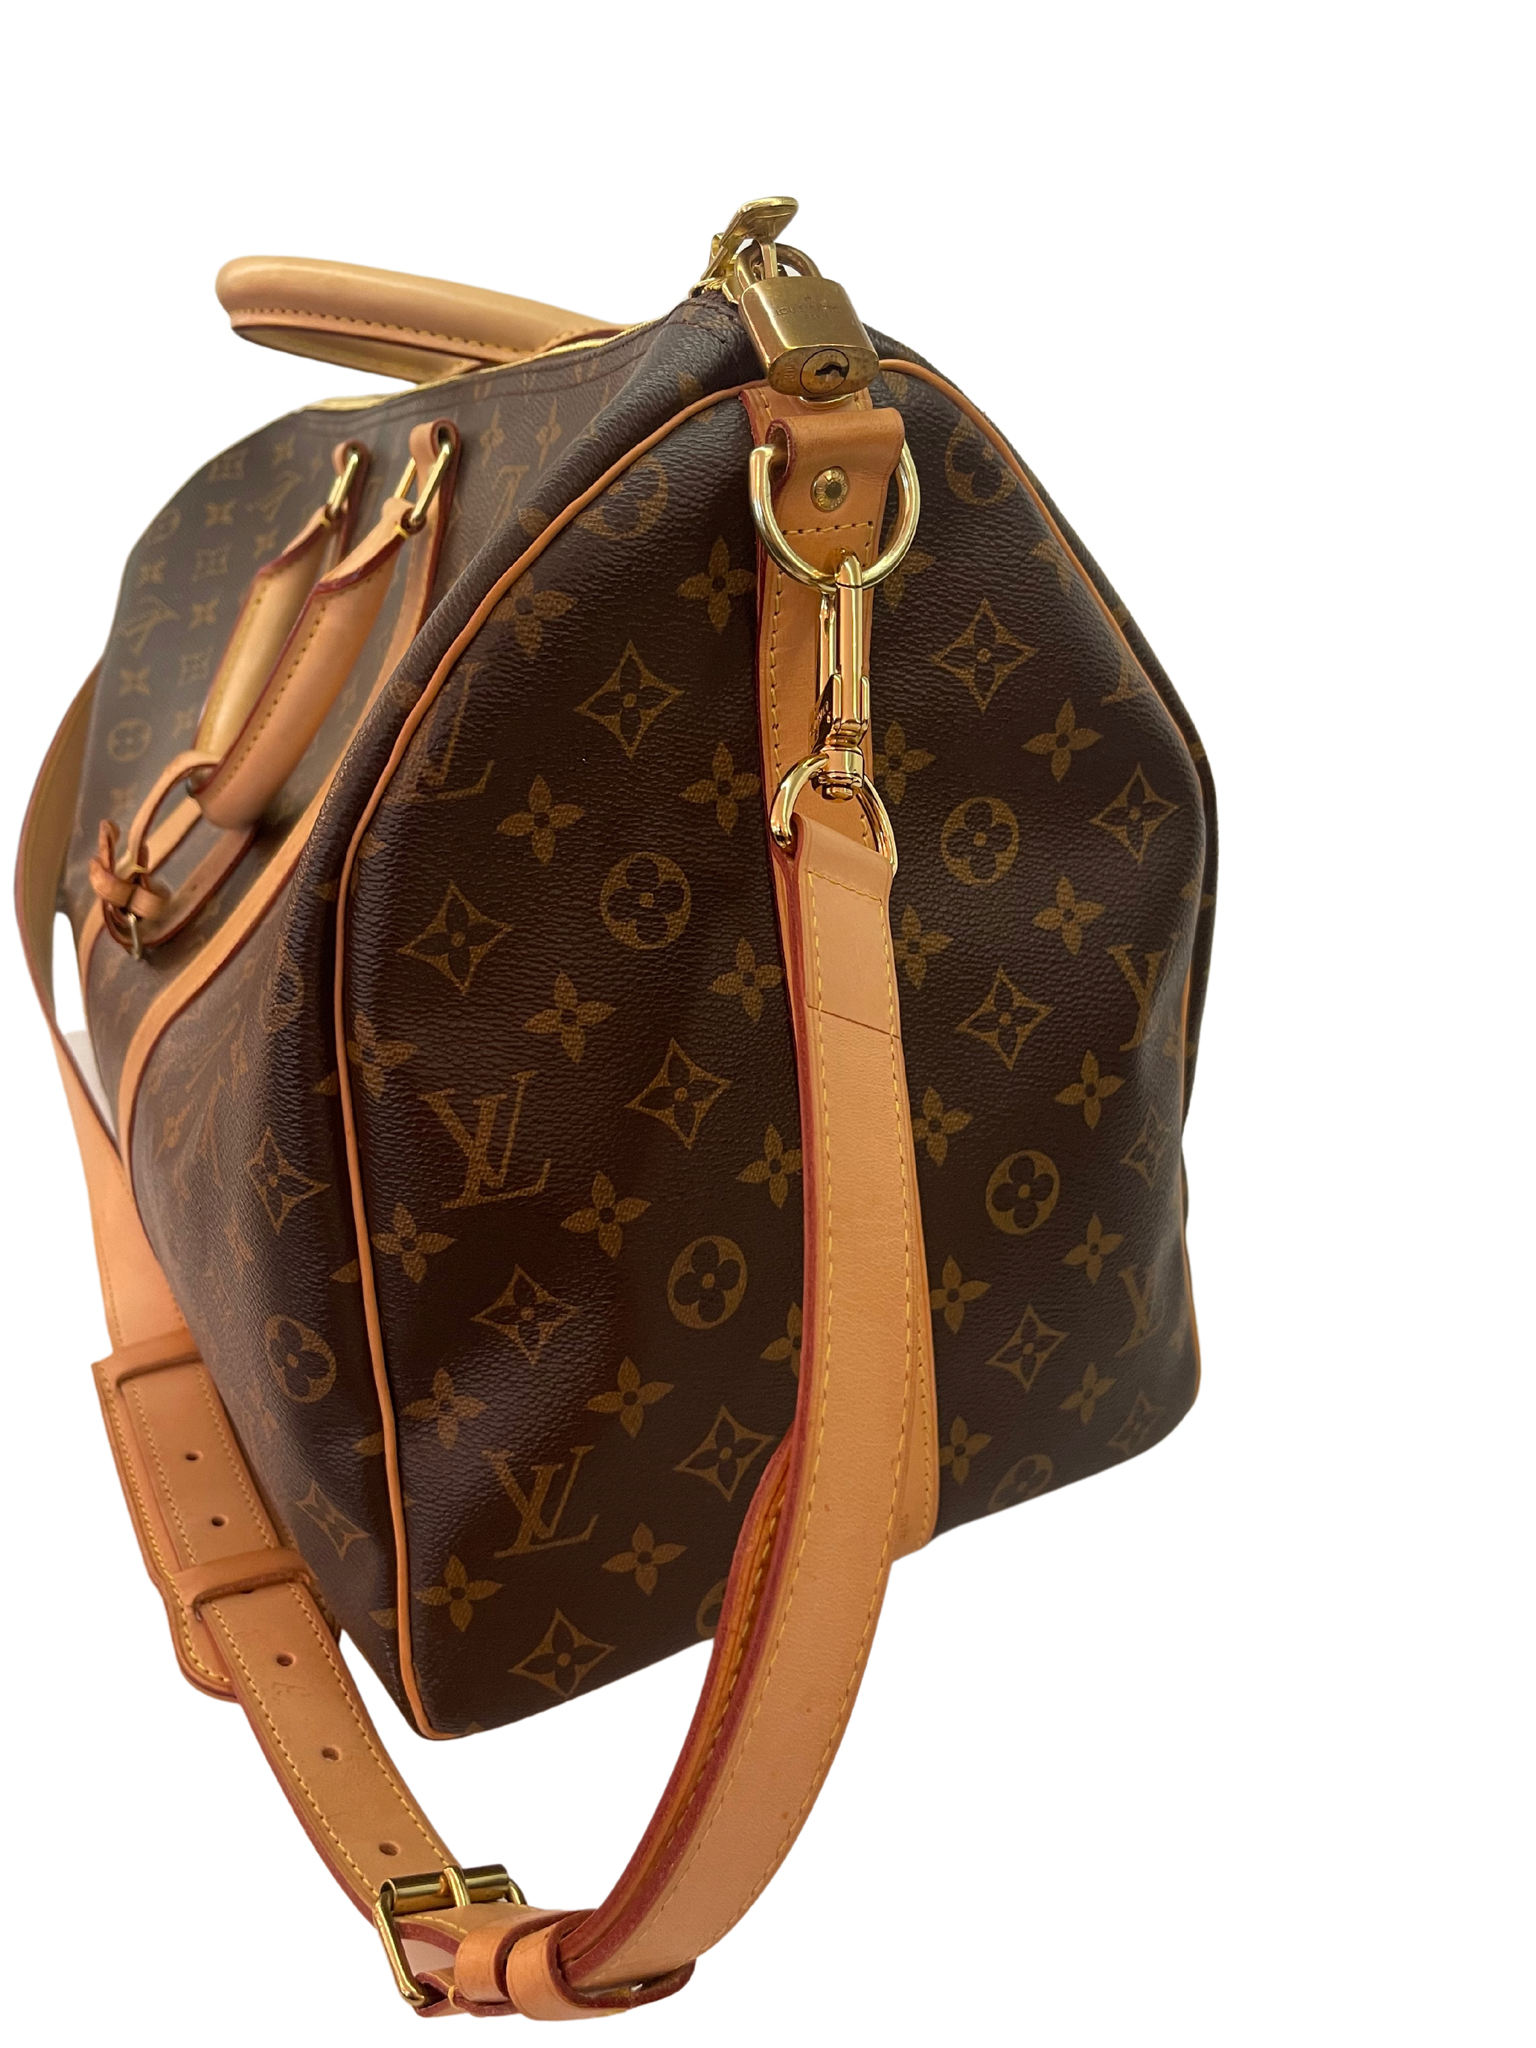 lv consignment